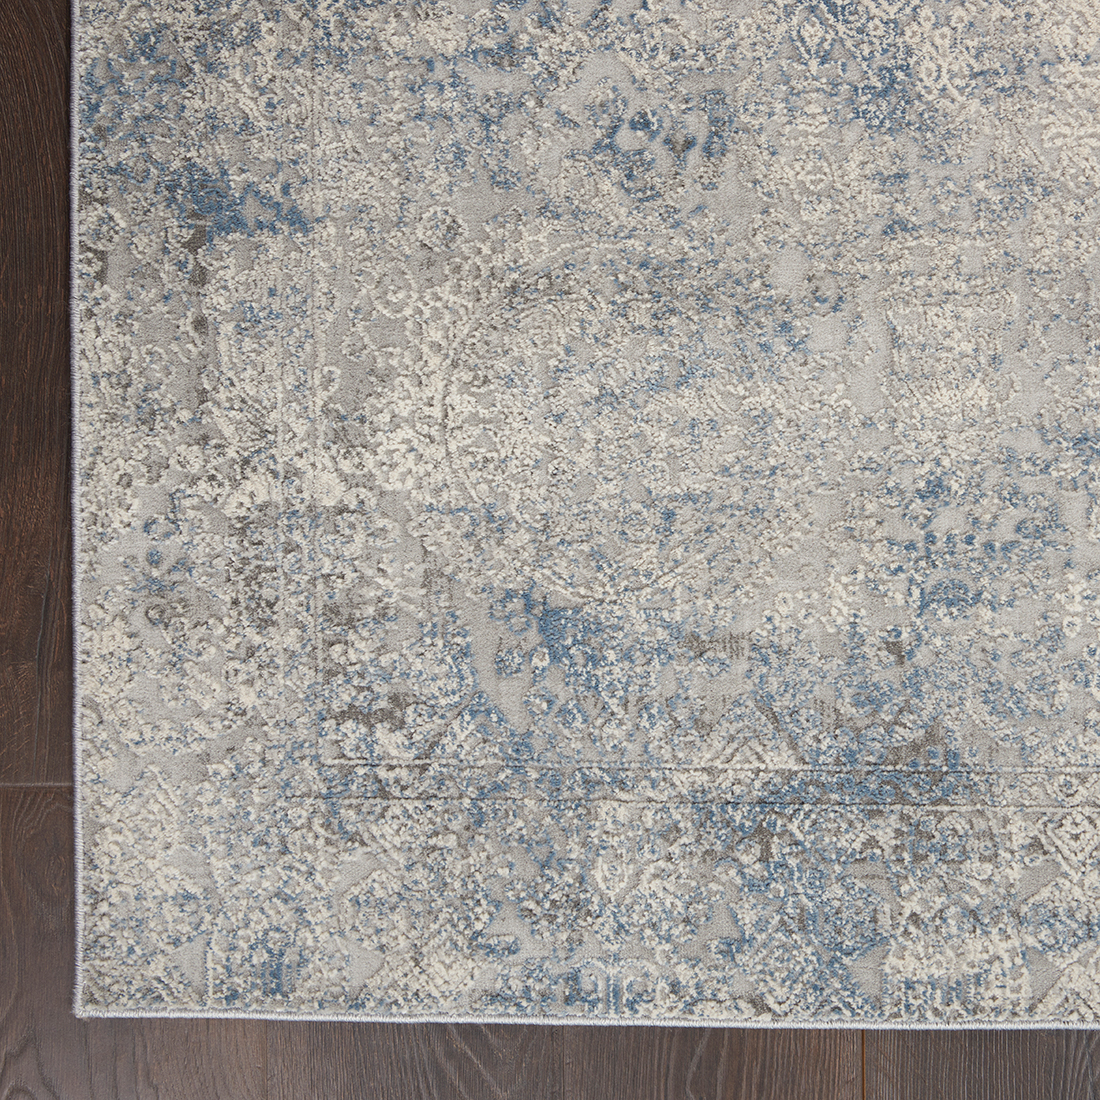 Nourison Rugs - Rustic Textures Rectanglular RUS09 Rug in Ivory / Light Blue - 2.2m x 1.6m